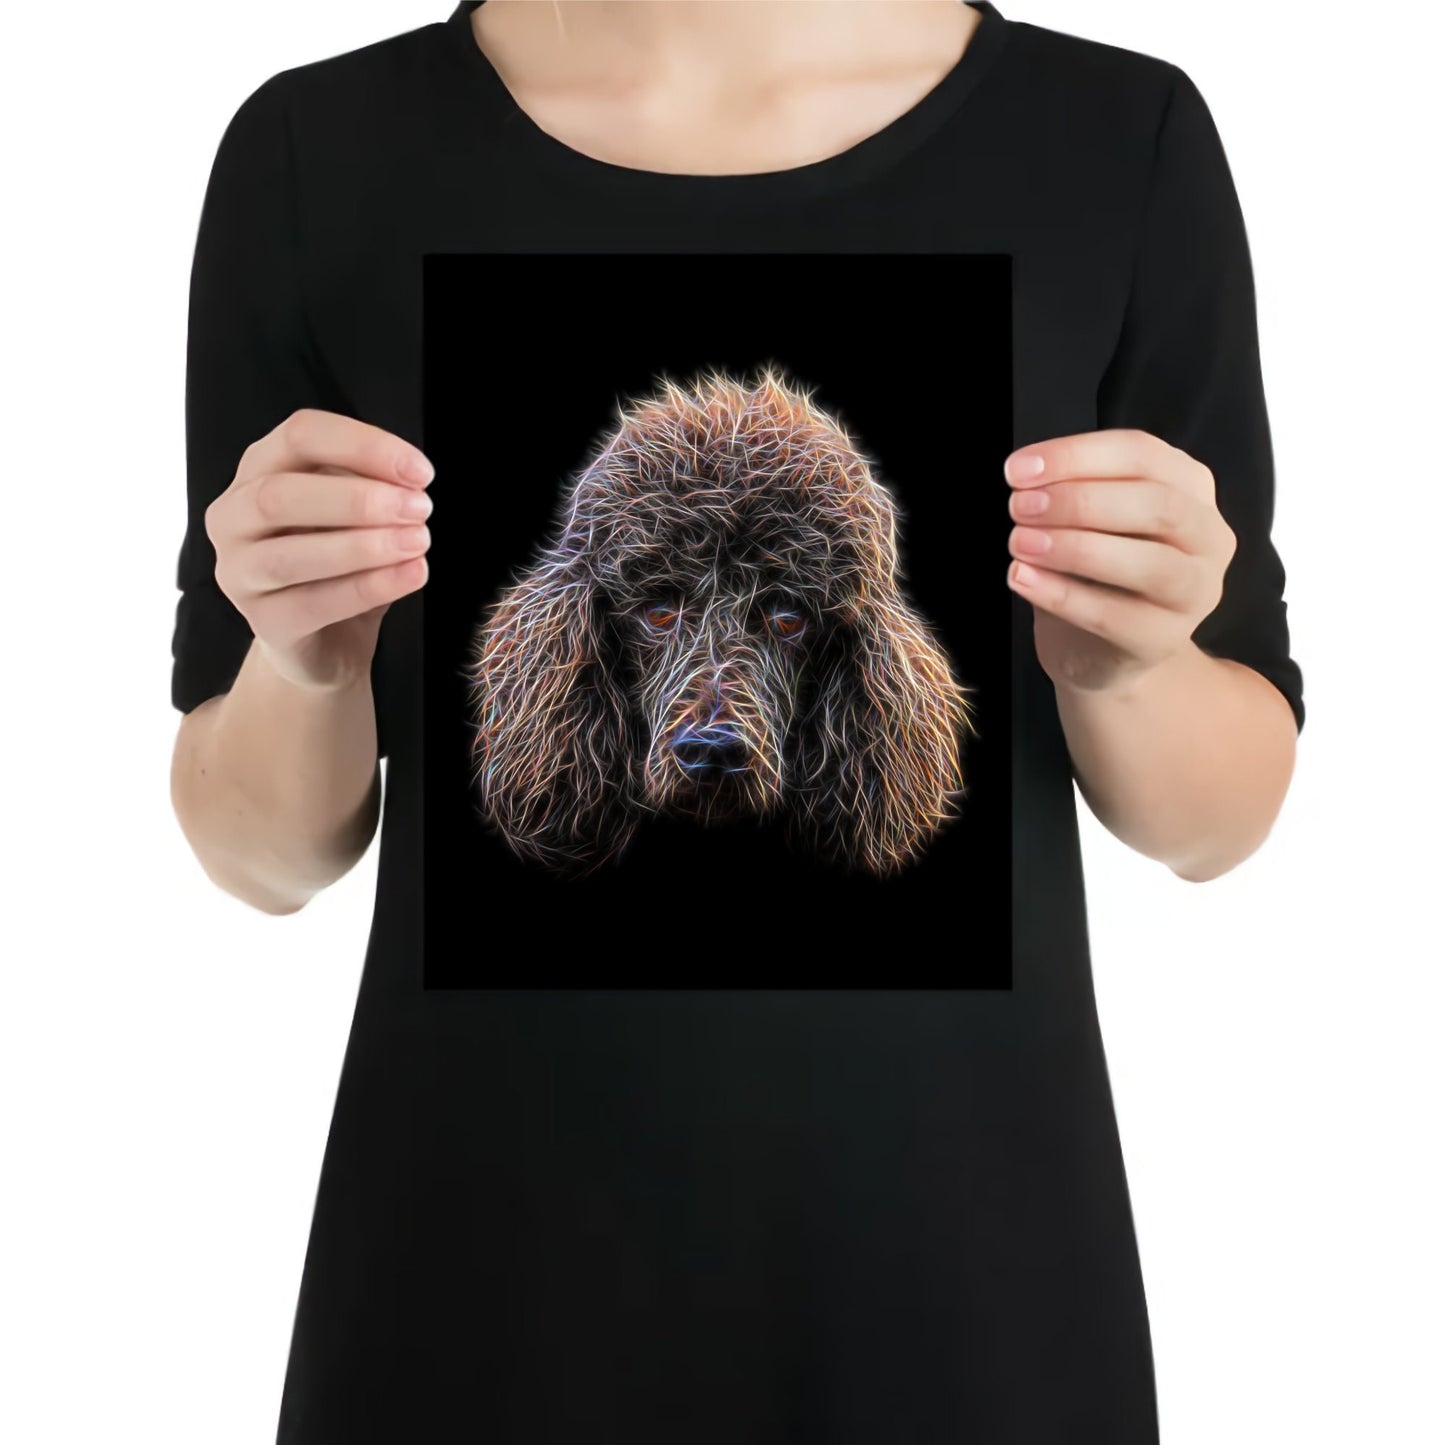 Chocolate Brown Standard Poodle Metal Wall Plaque with Stunning Fractal Art Design.